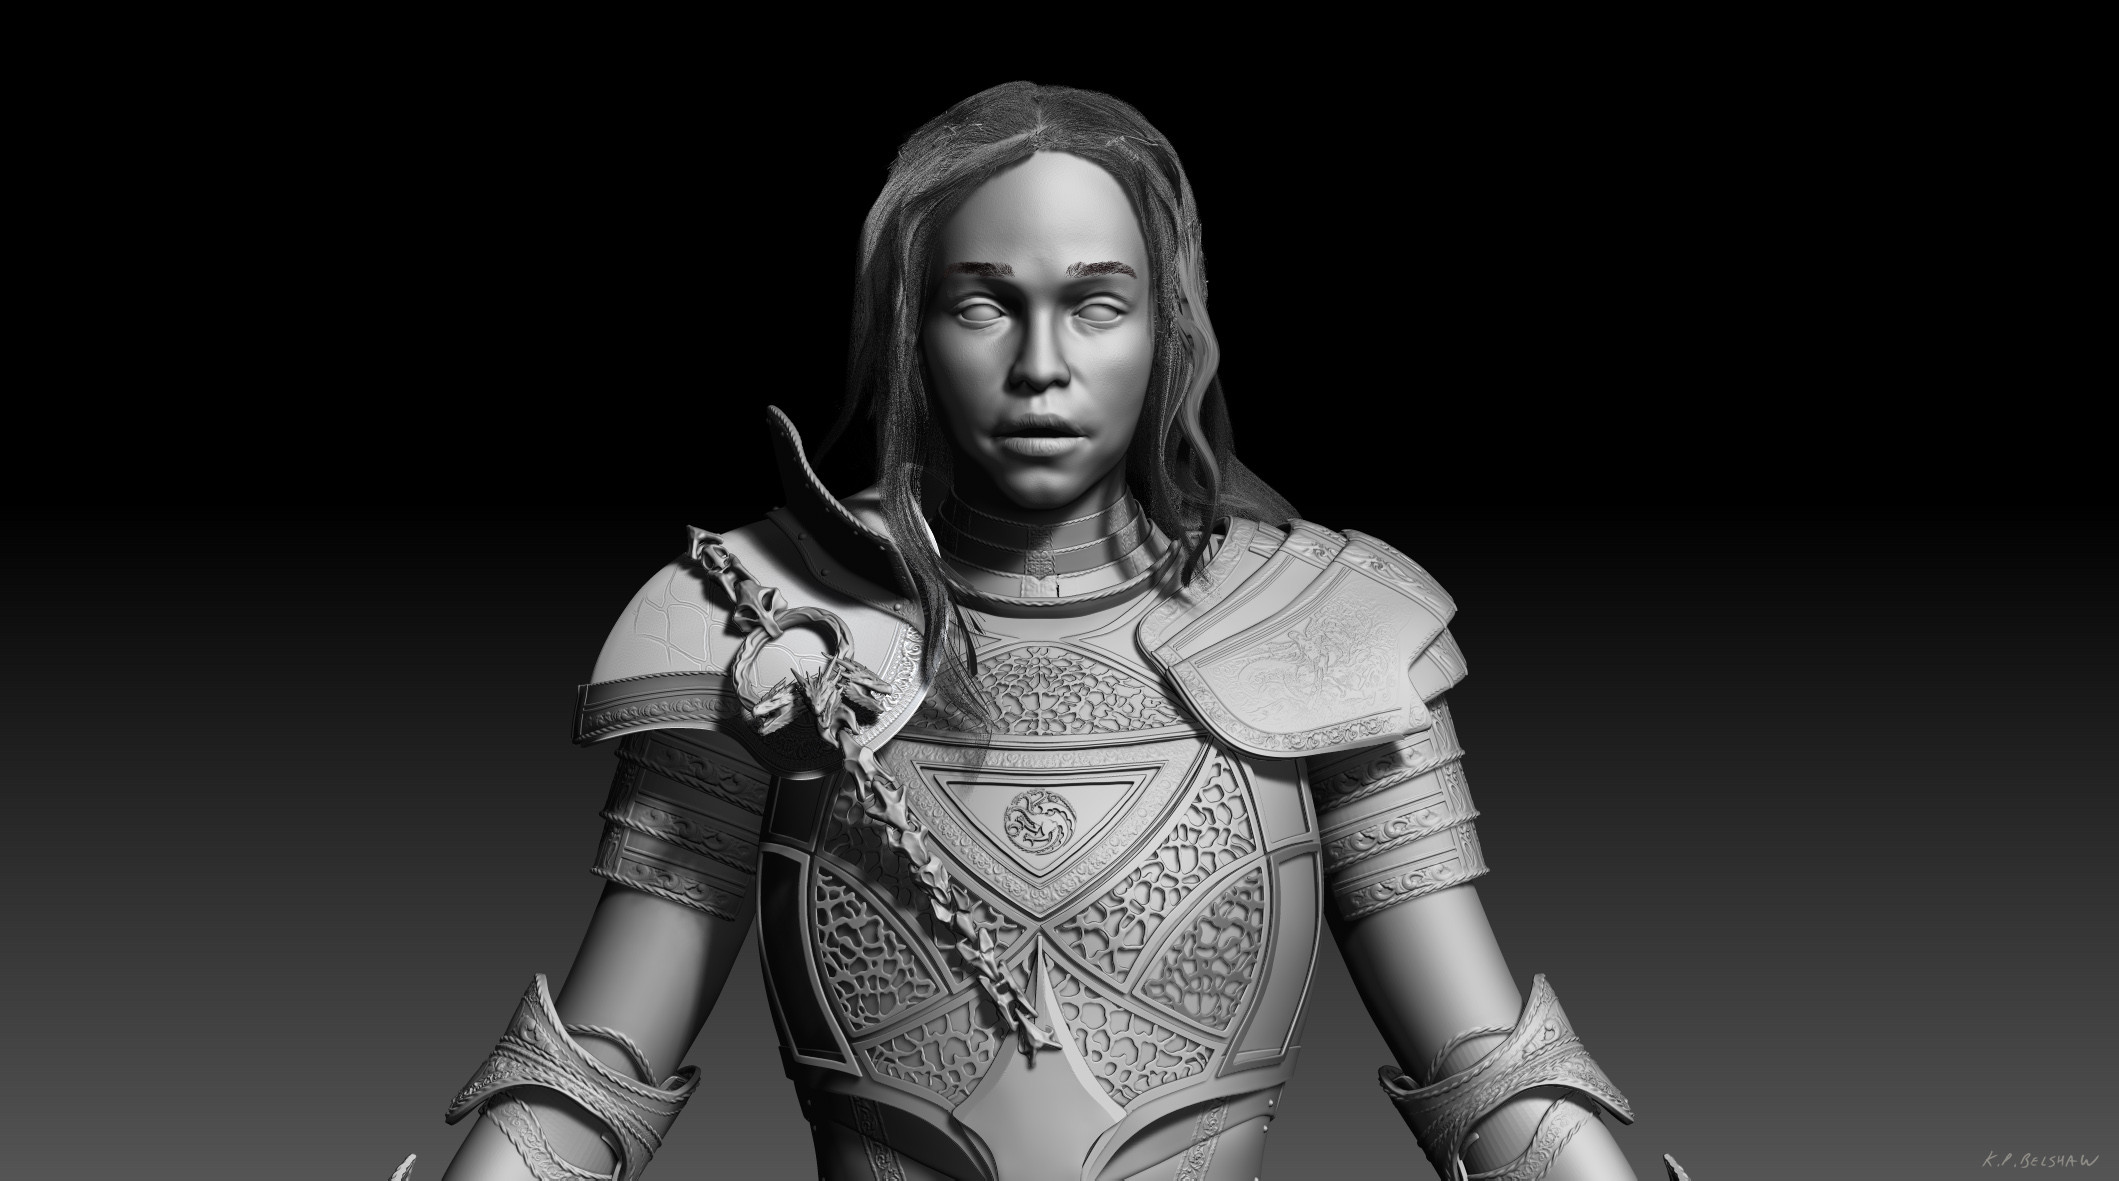 early-ish Zbrush render, was trying out slightly different extra details which i decided to take out.